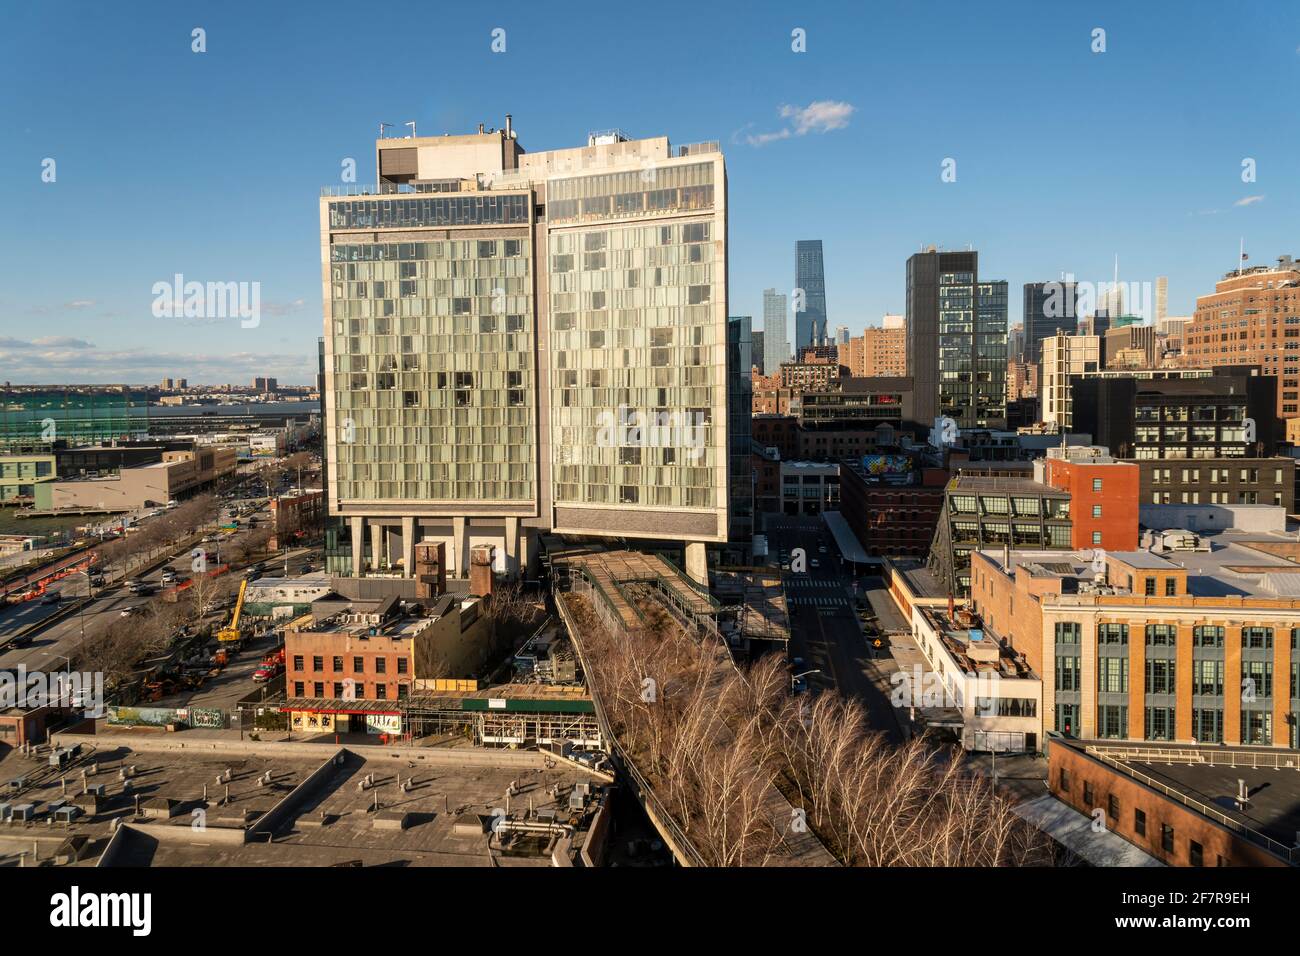 Meatpacking District and Chelsea in New York seen from the Whitney Museum on Friday, March 26, 2021. (© Richard B. Levine) Stock Photo